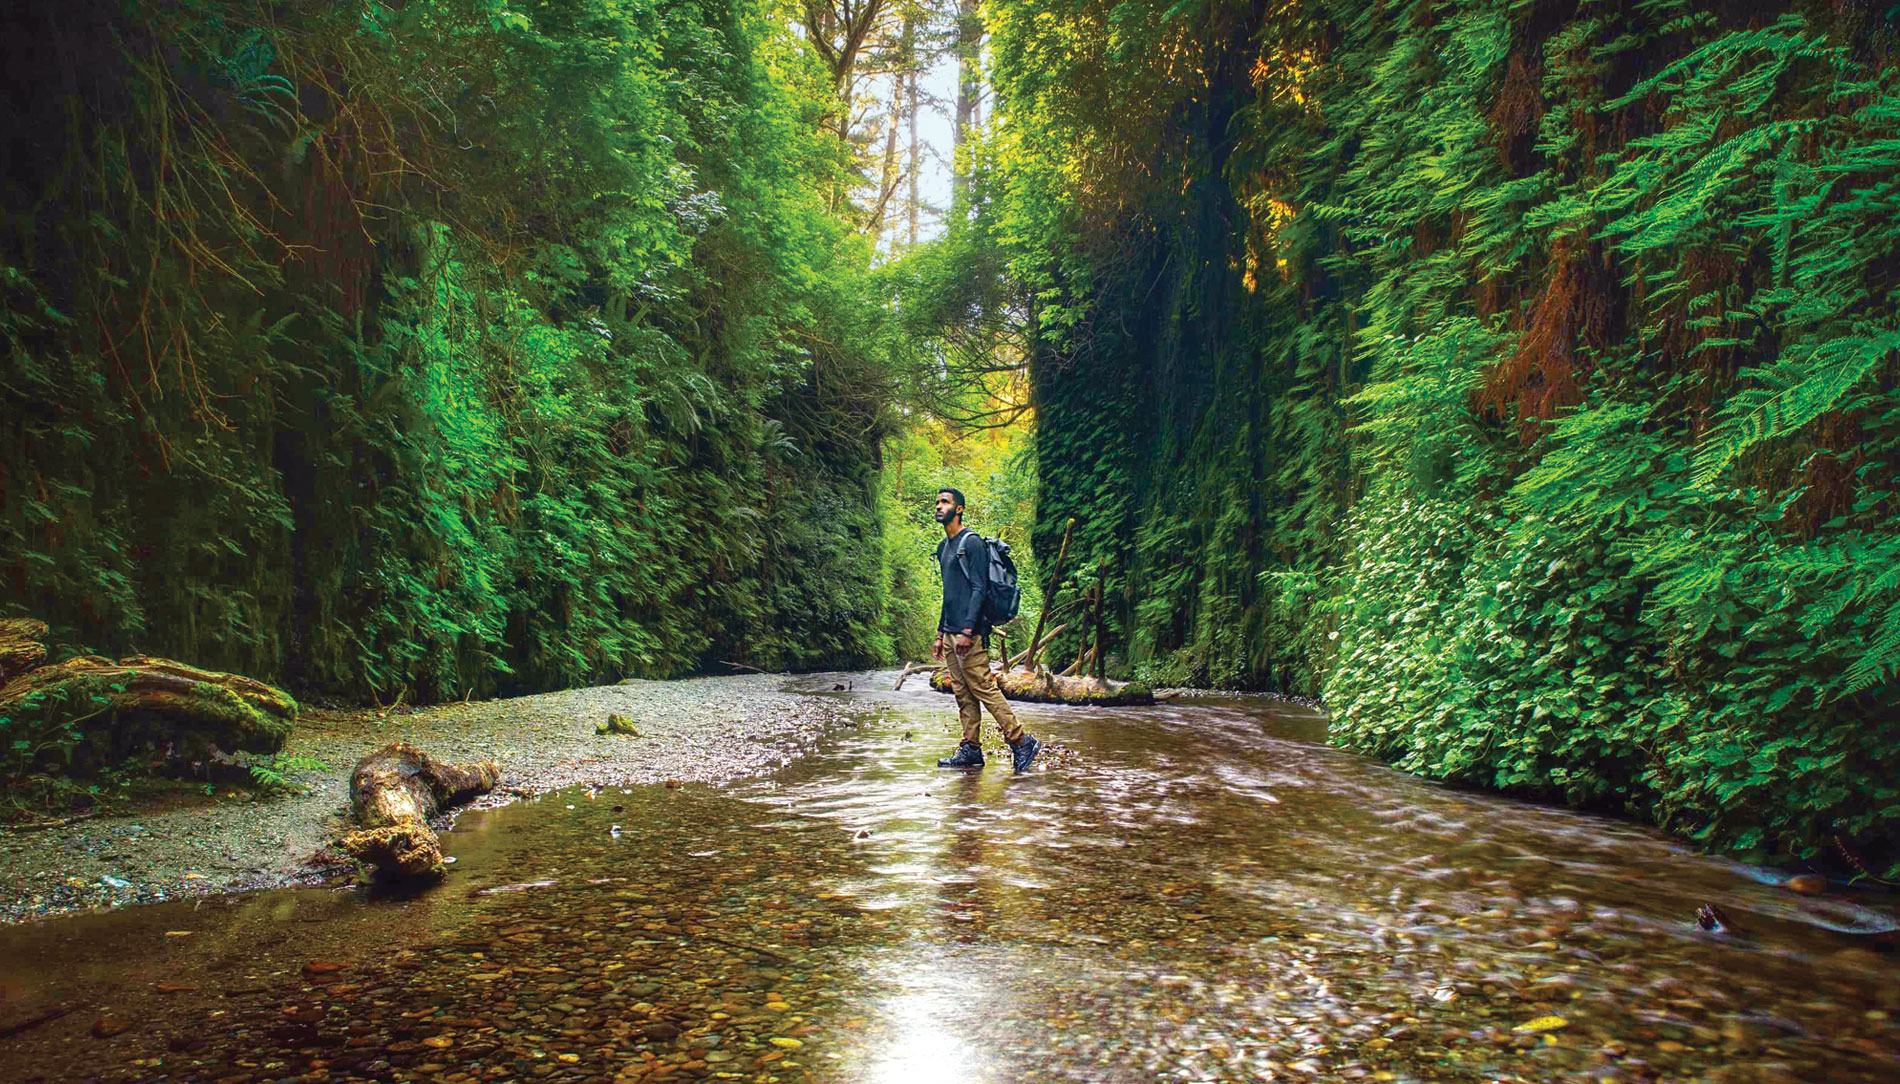 Fern Canyon in California's Prairie Creek Redwoods State Park